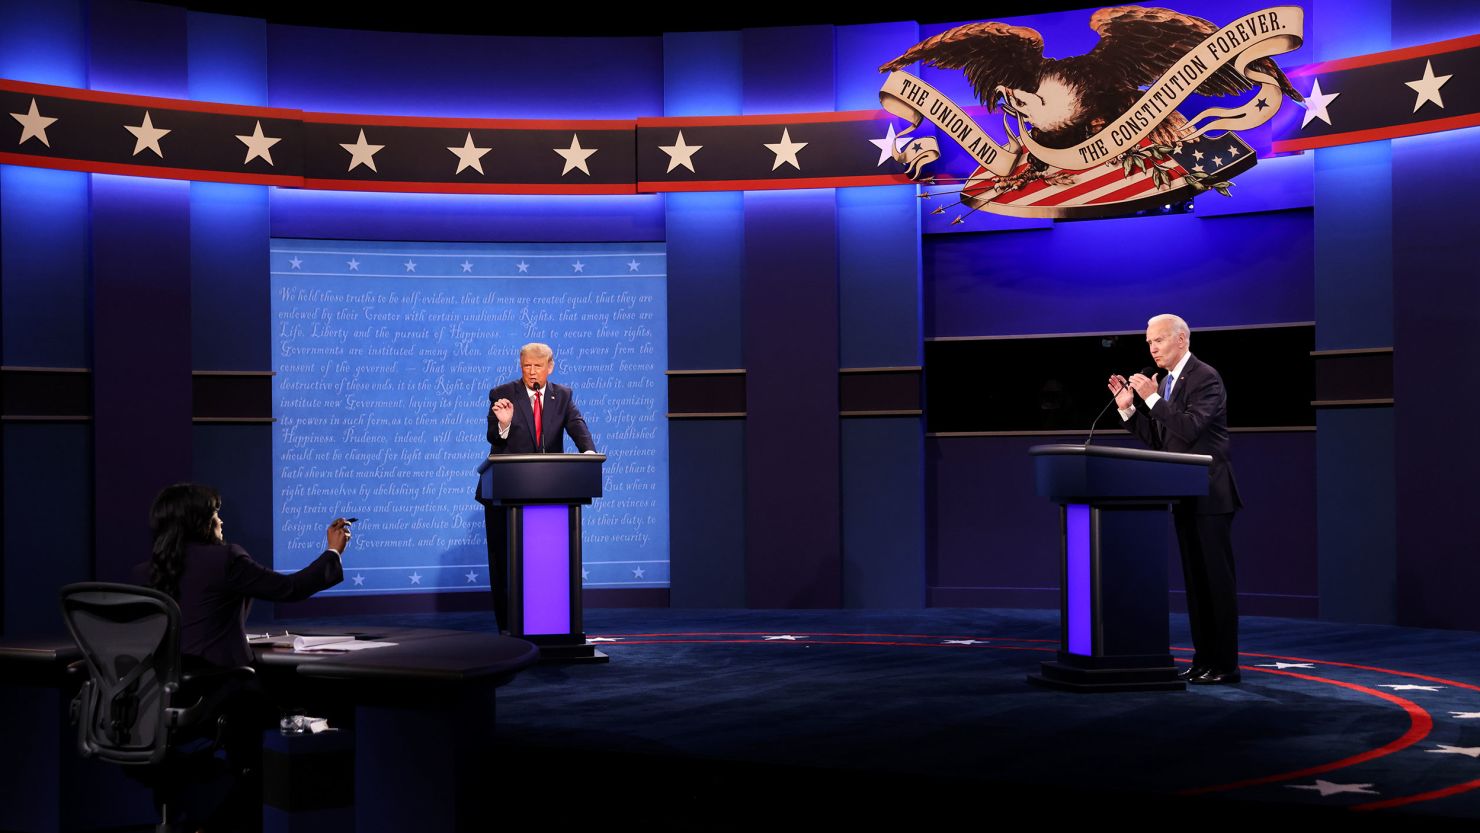 U.S. President Donald Trump and Democratic presidential nominee Joe Biden participate in the final presidential debate at Belmont University on October 22, 2020 in Nashville, Tennessee.